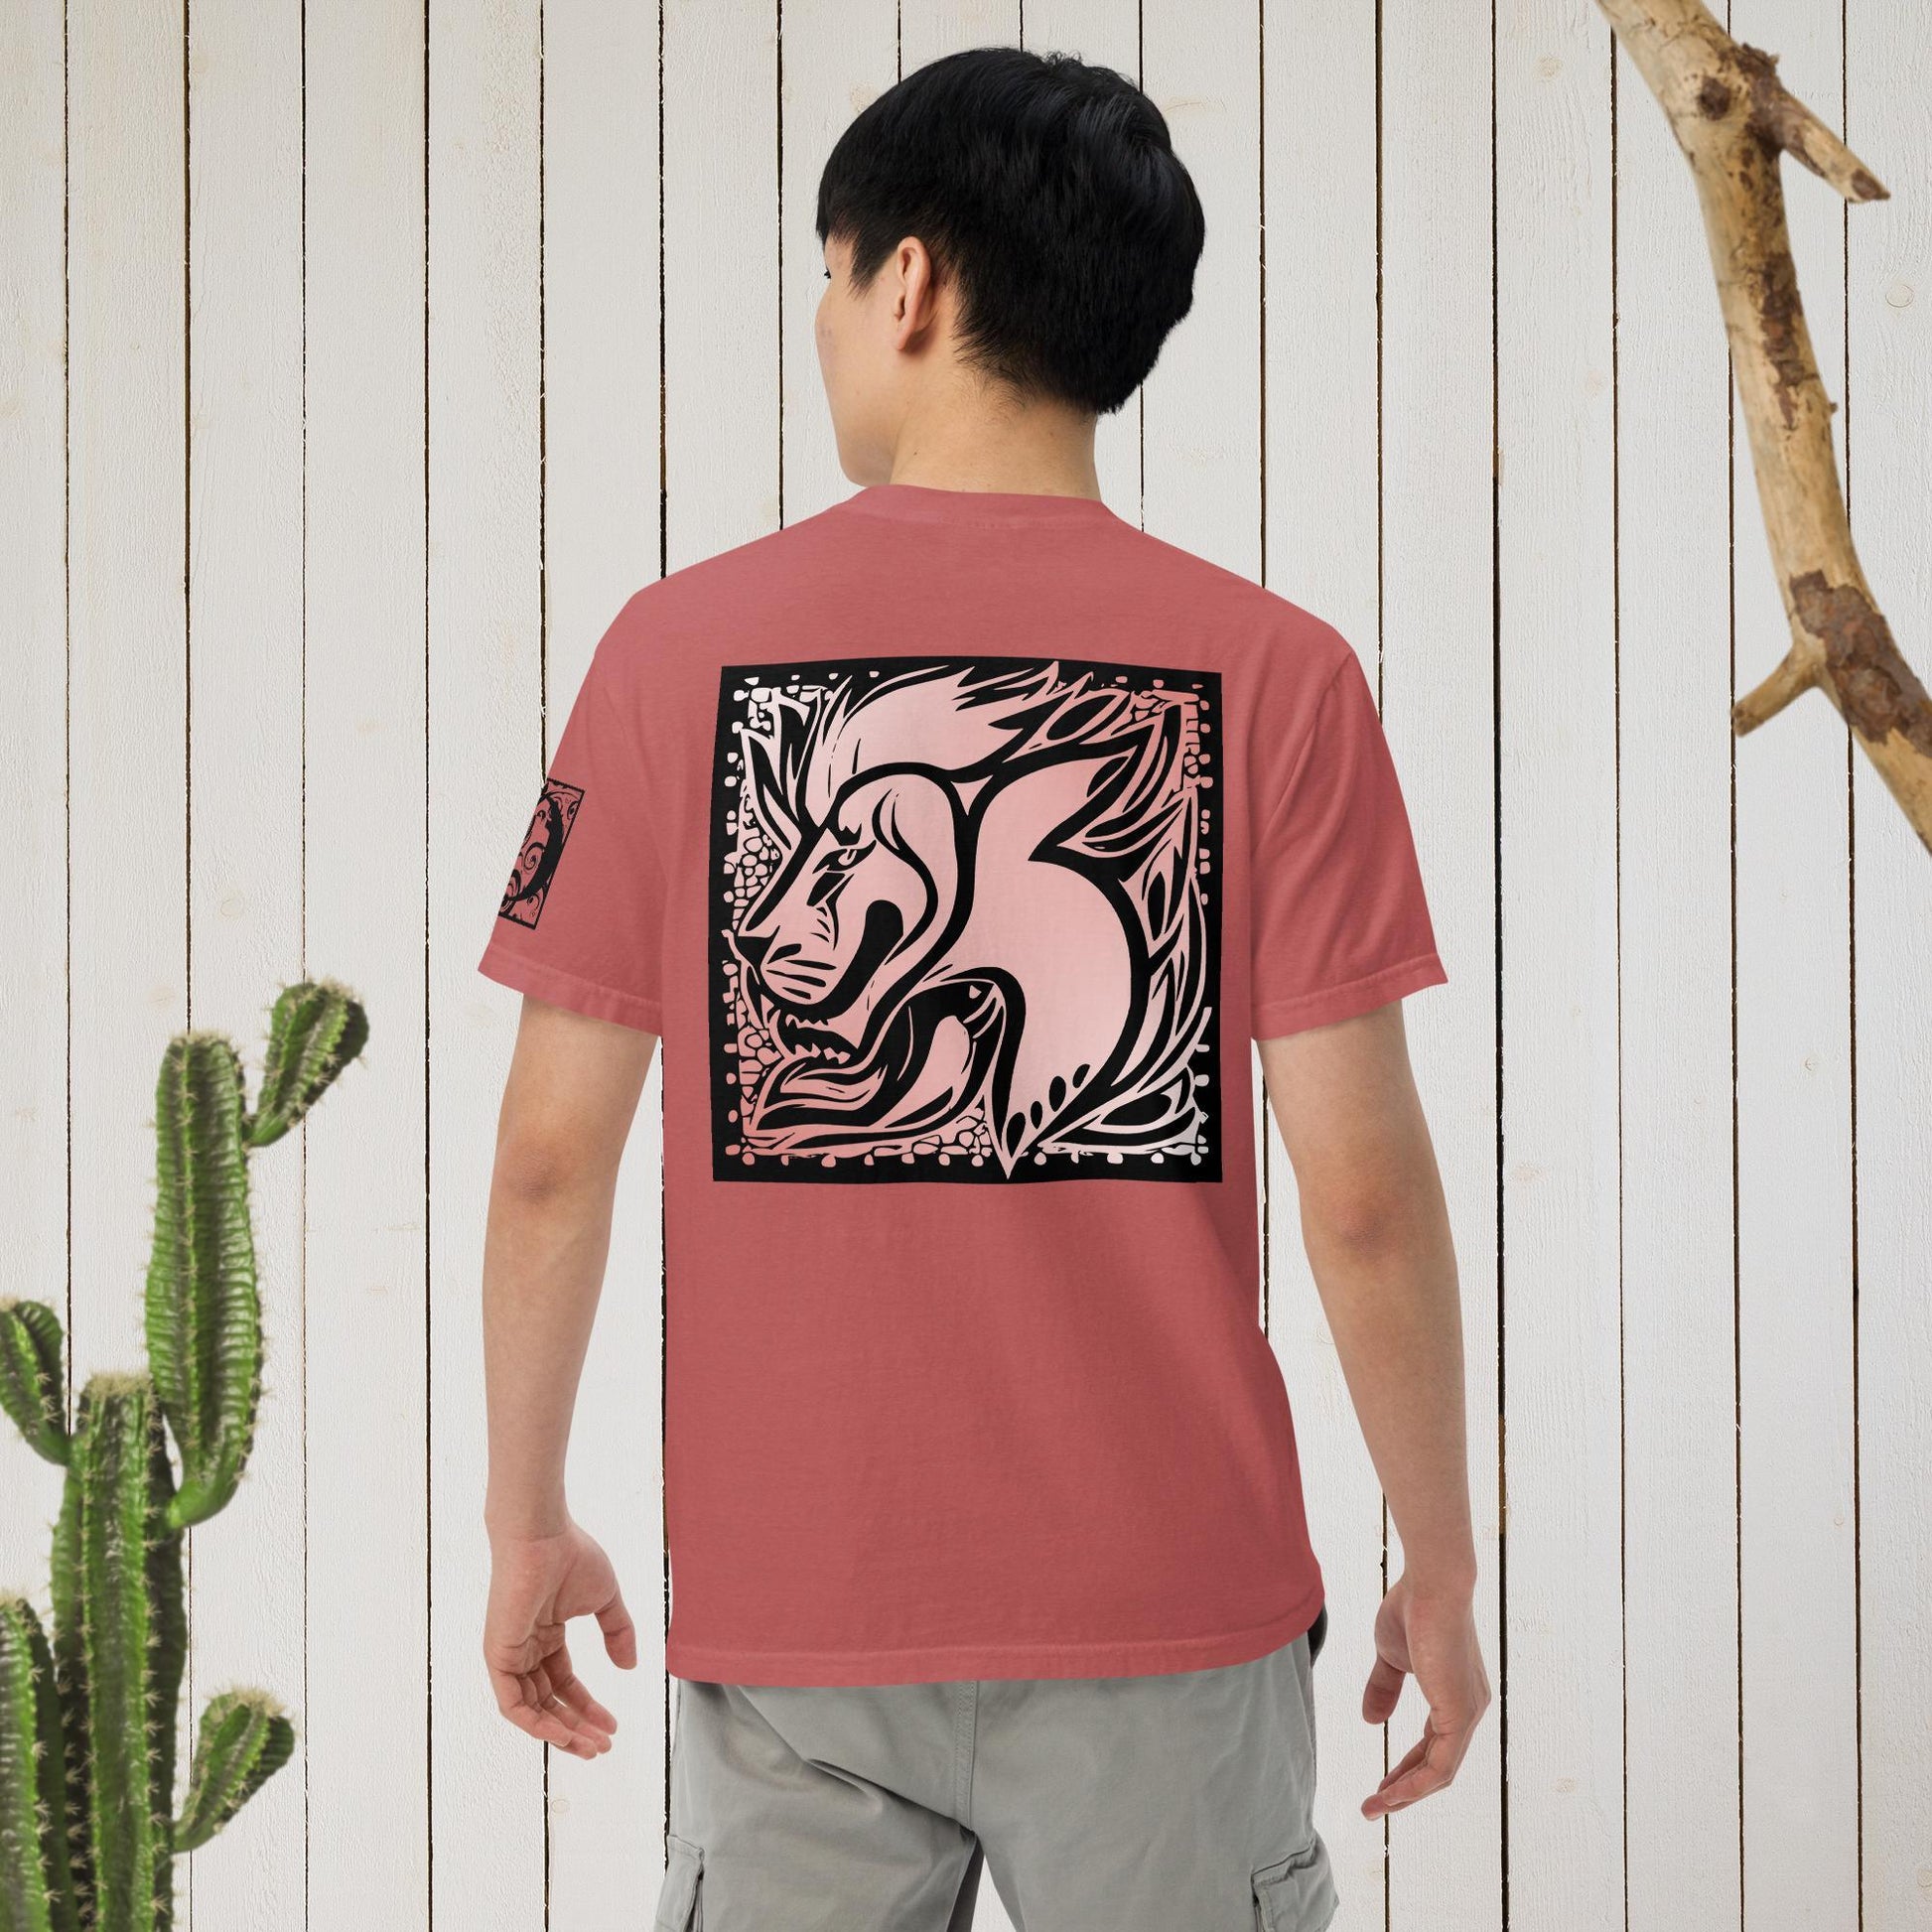 The Dominant Lion DISC Themed T-Shirt - Christian DISC®